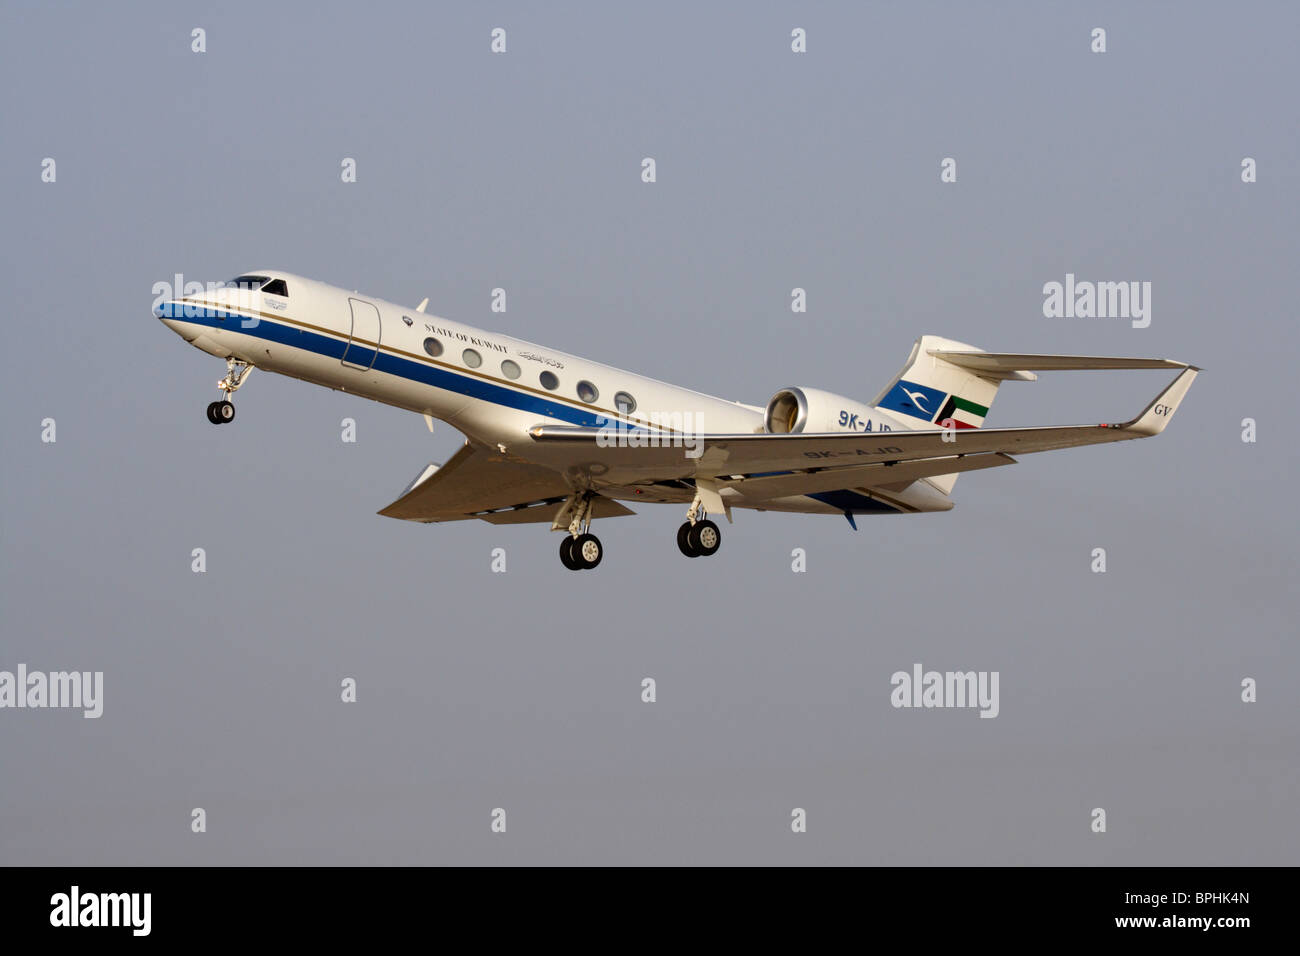 Government of Kuwait Gulfstream V executive jet aircraft, used in an official VIP transport role, taking off Stock Photo